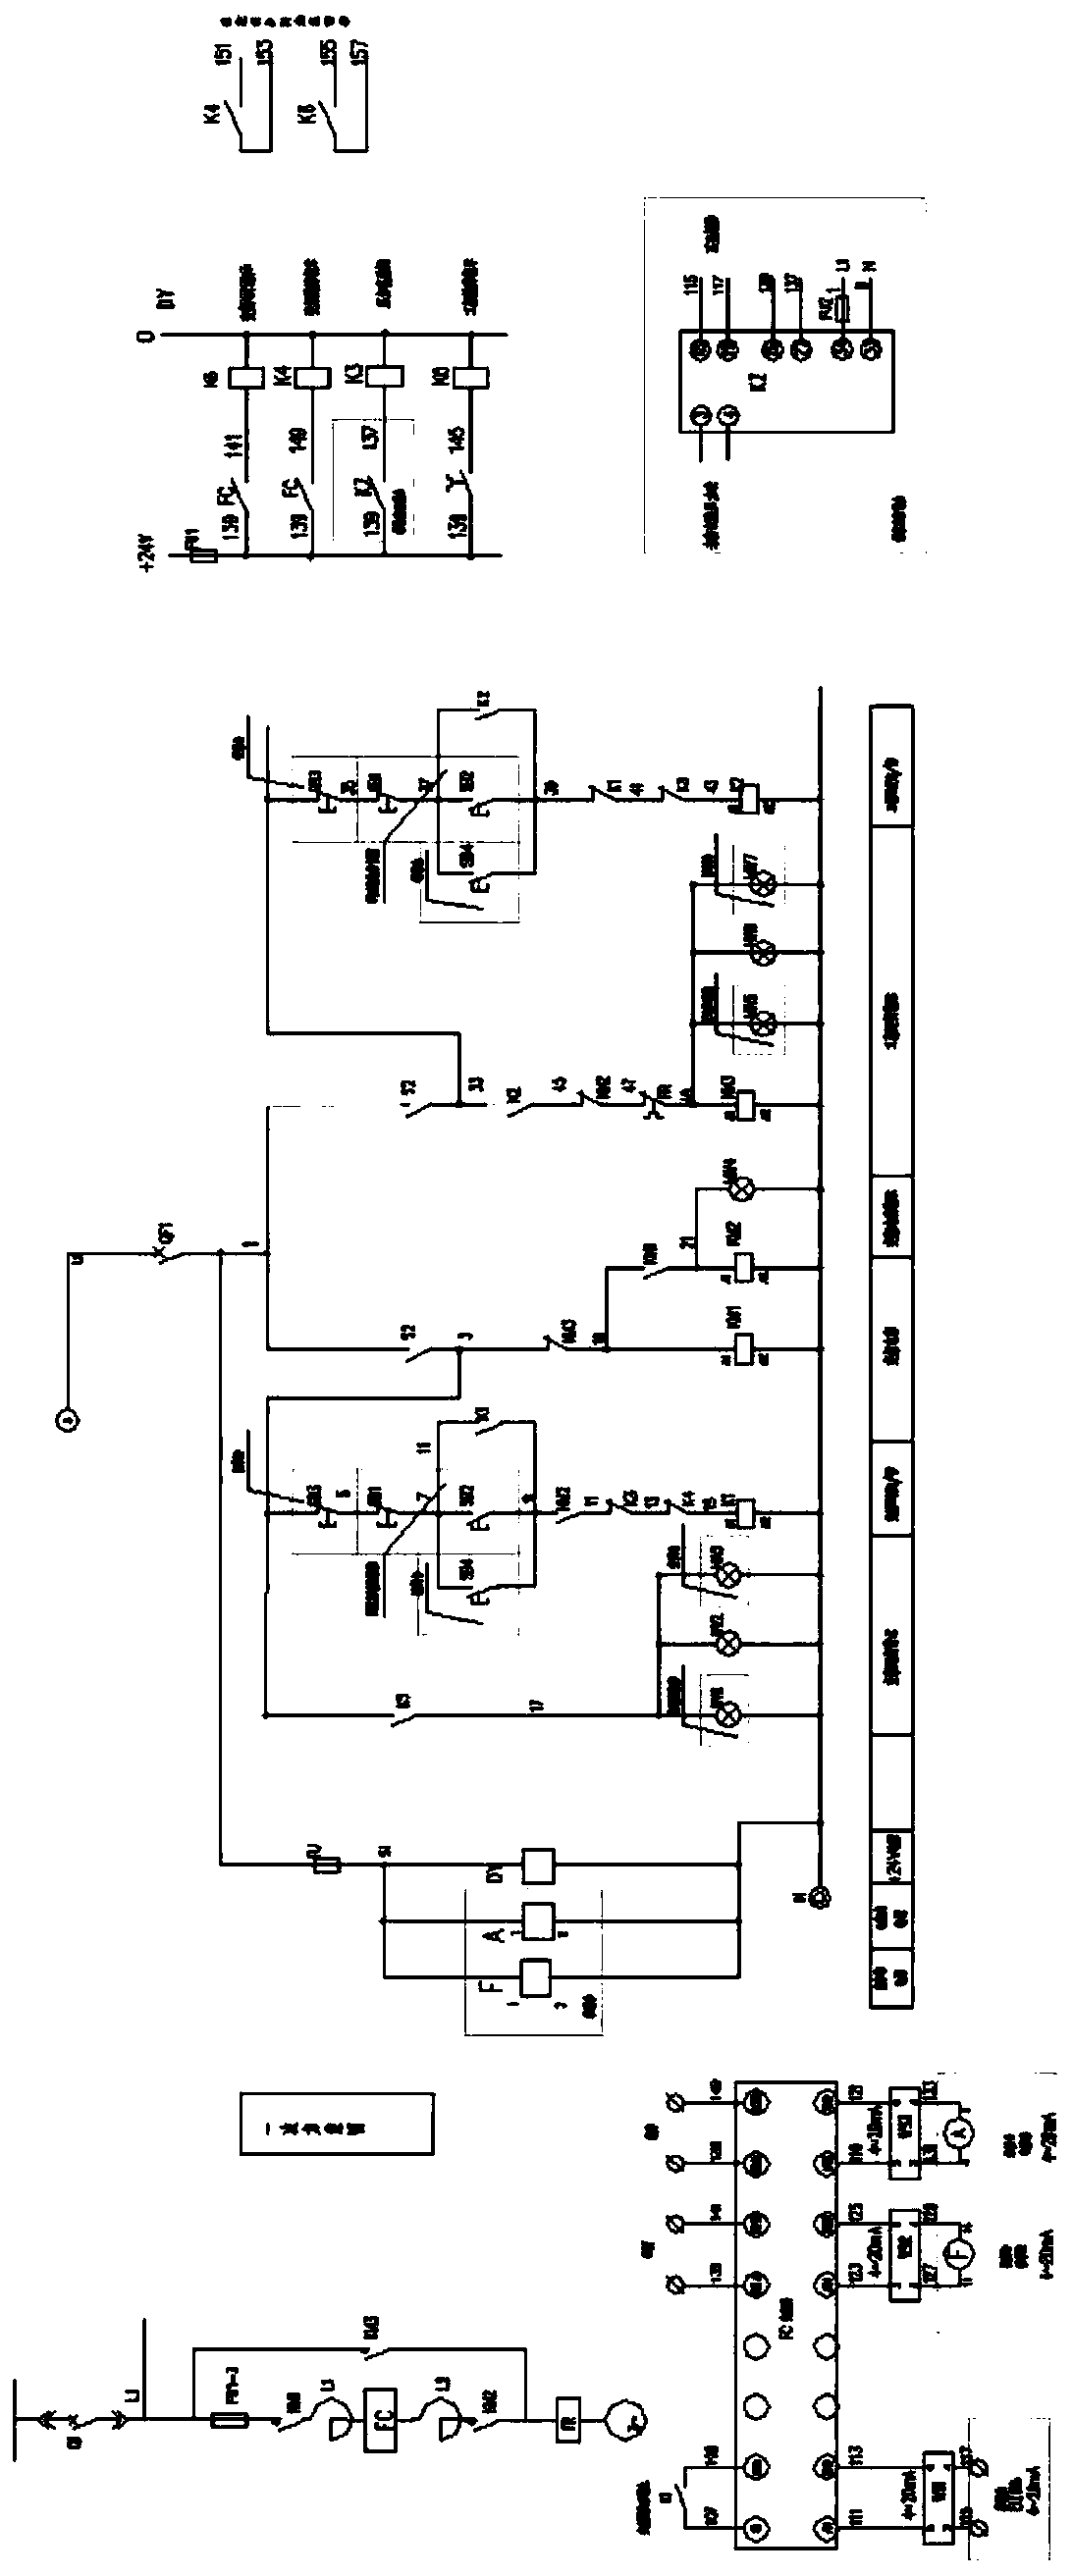 Control method for frequency conversion regulation of causticizing green liquor system